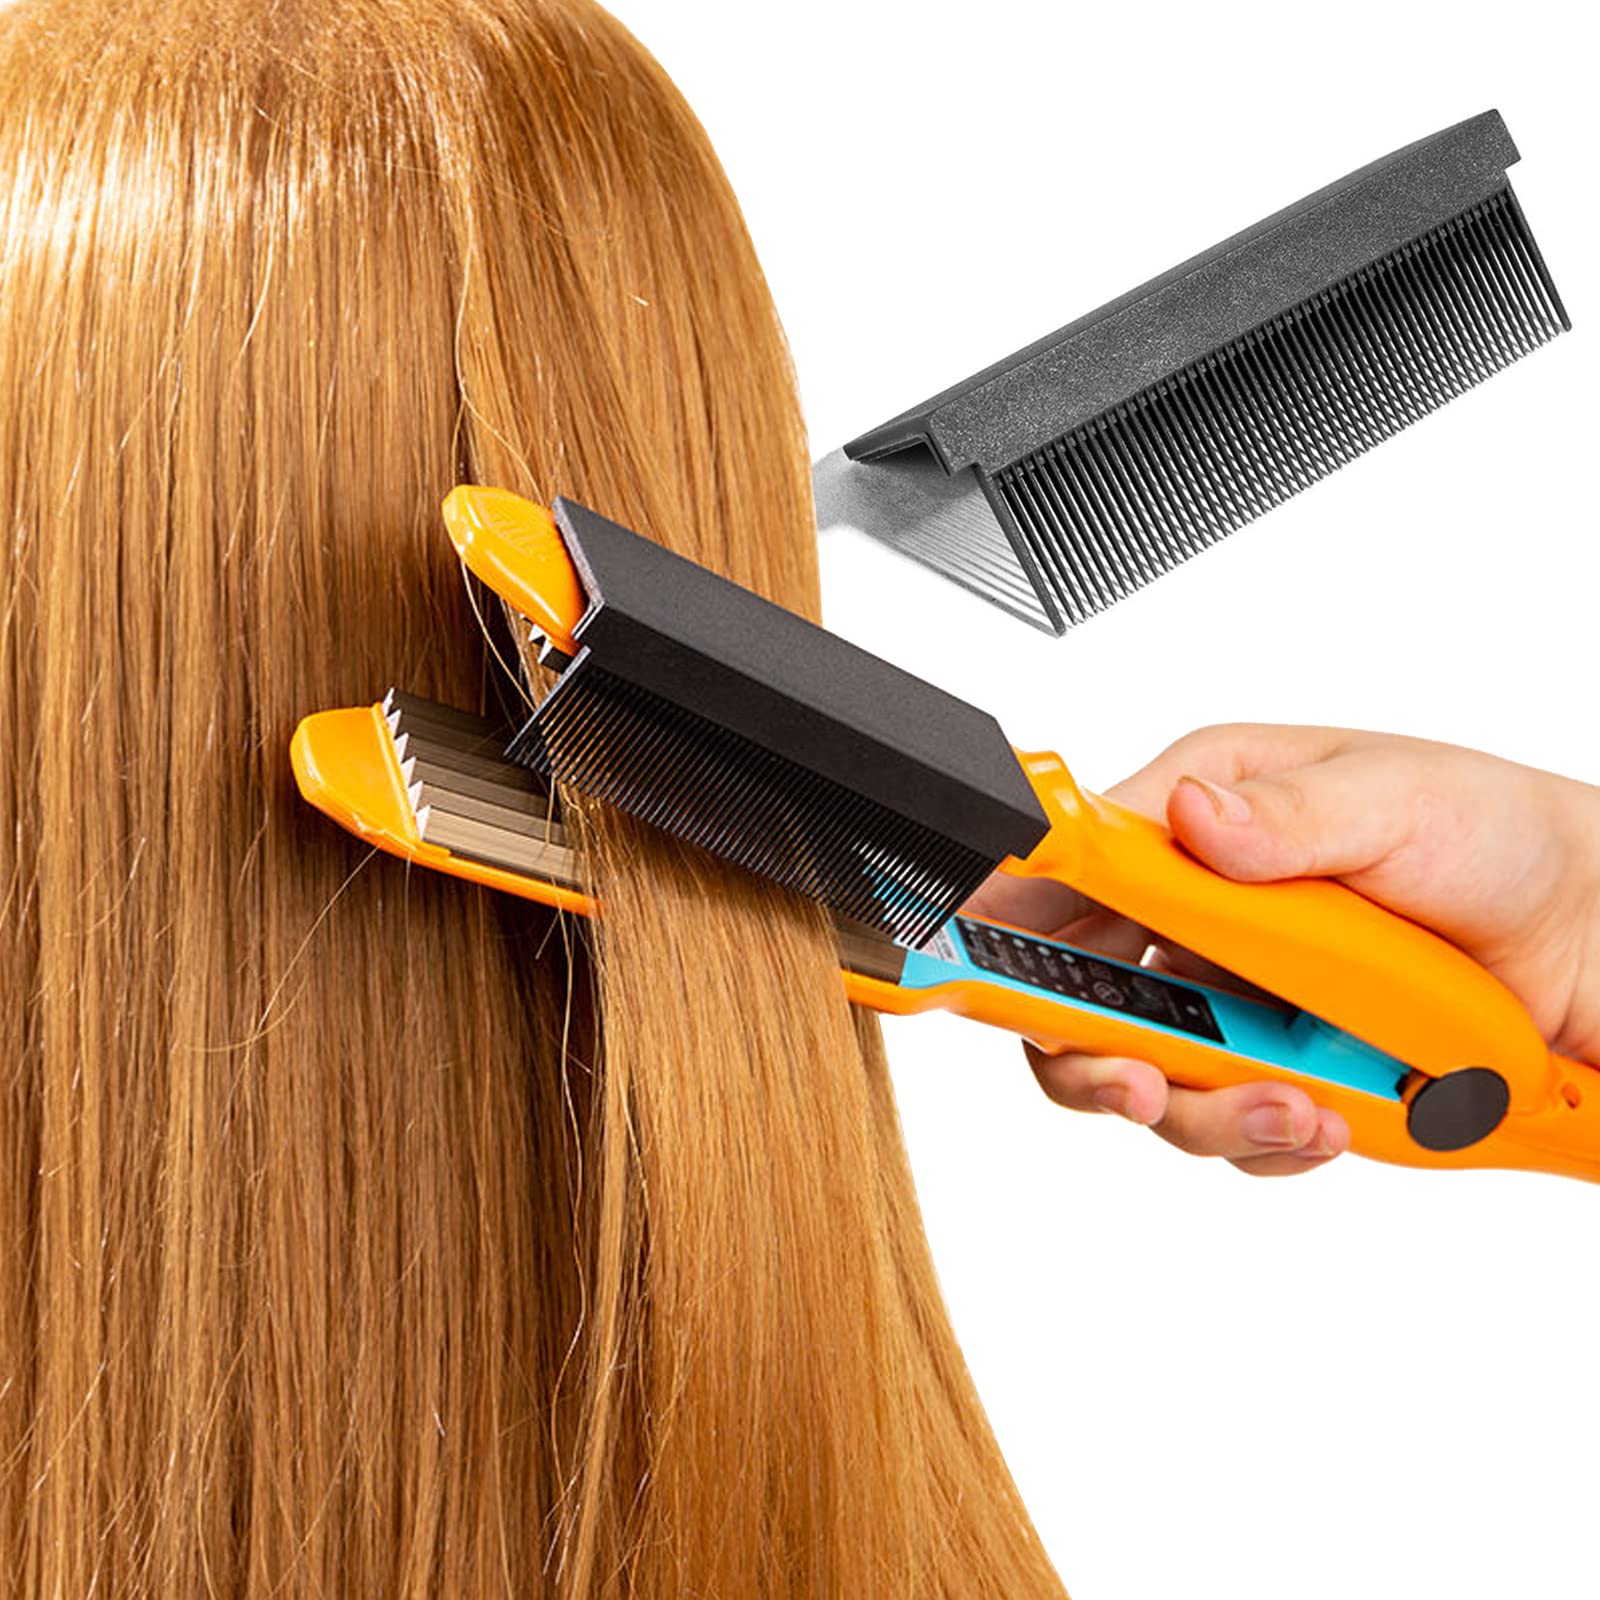 Grip Comb for Flat Iron Combs Attachment Clip Fit Hair Straightening